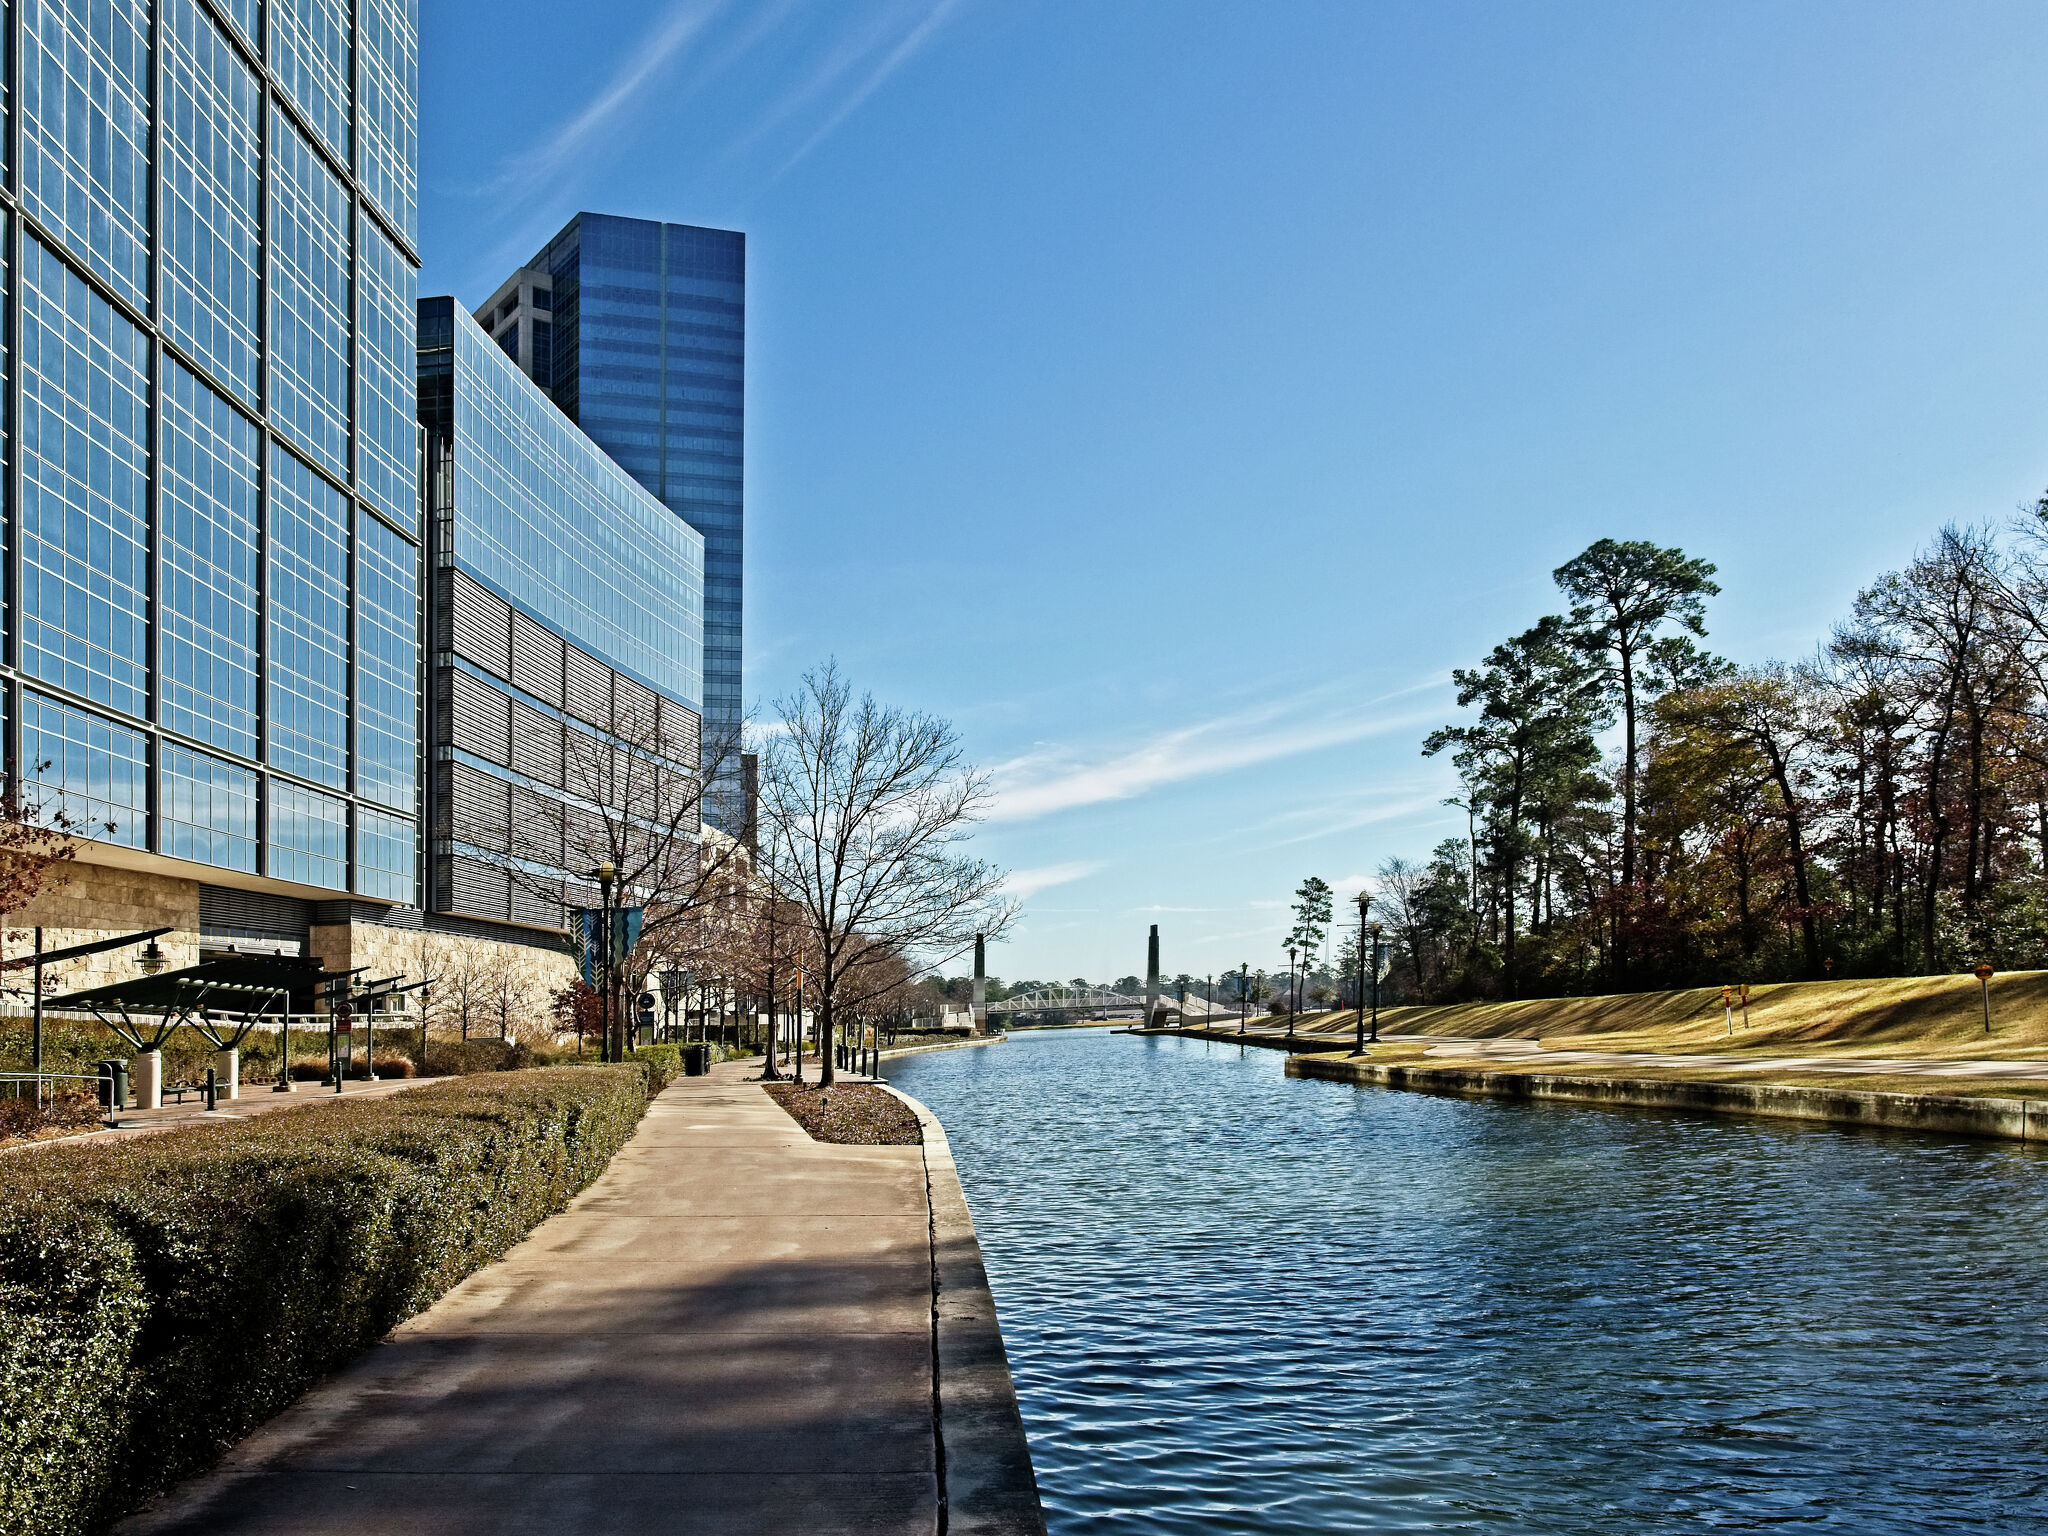 Best cities to buy a house: The Woodlands, Texas, named tops in U.S.